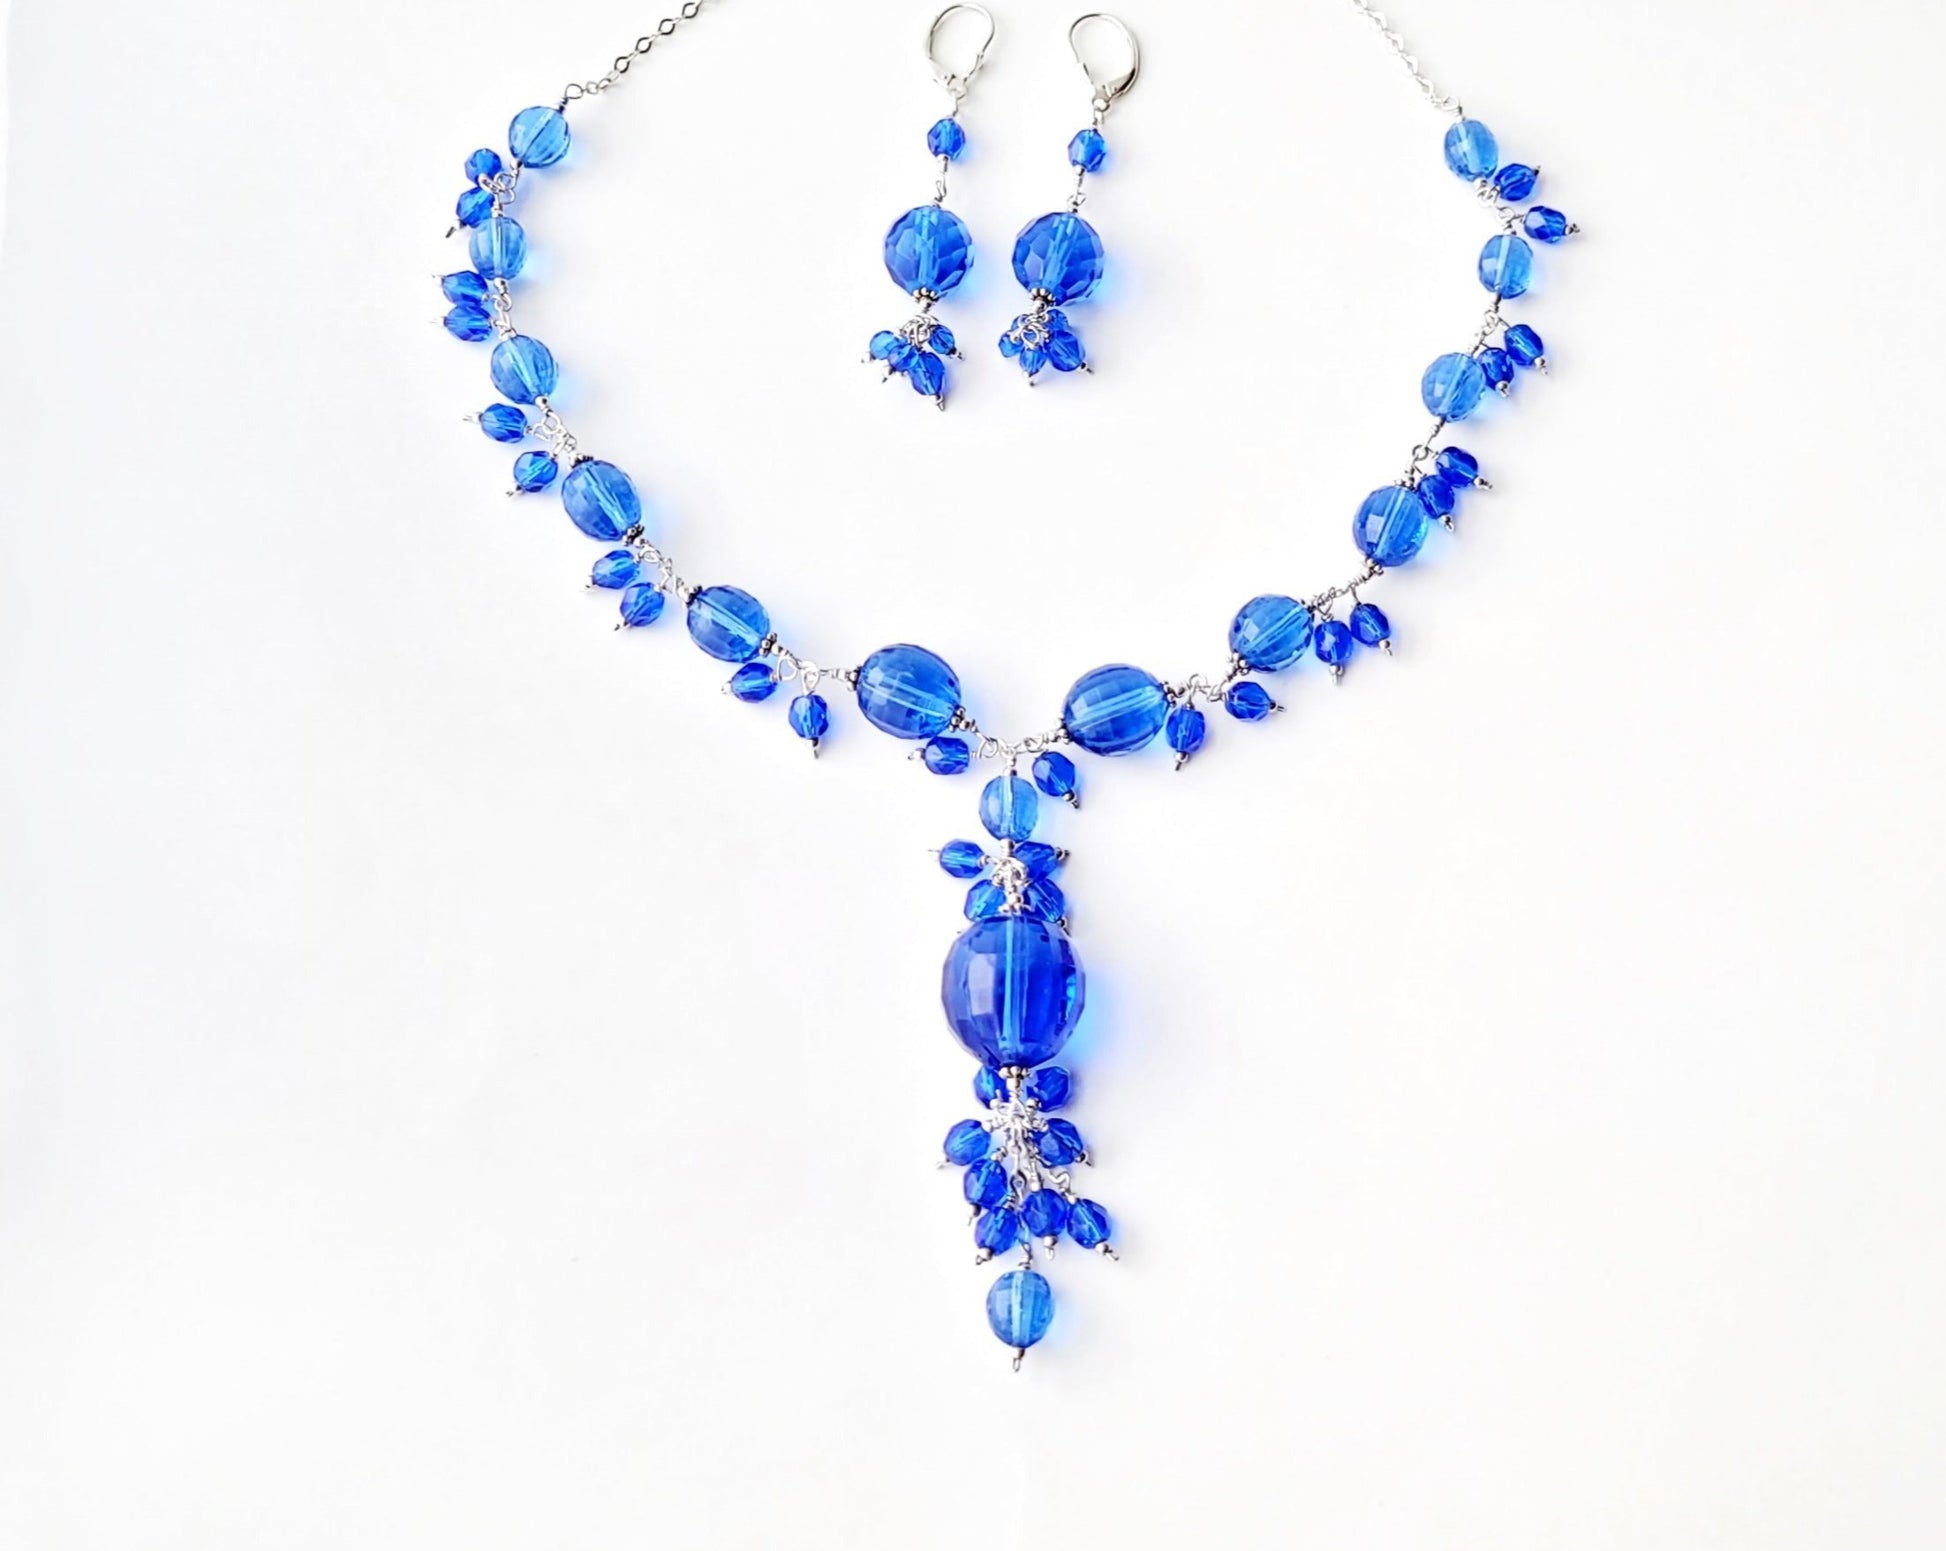 Twilight Blue Crystal Passion Necklace and Earring Set, Cluster Y Shape Blue Crystal Necklace and Long earrings, Sterling Silver